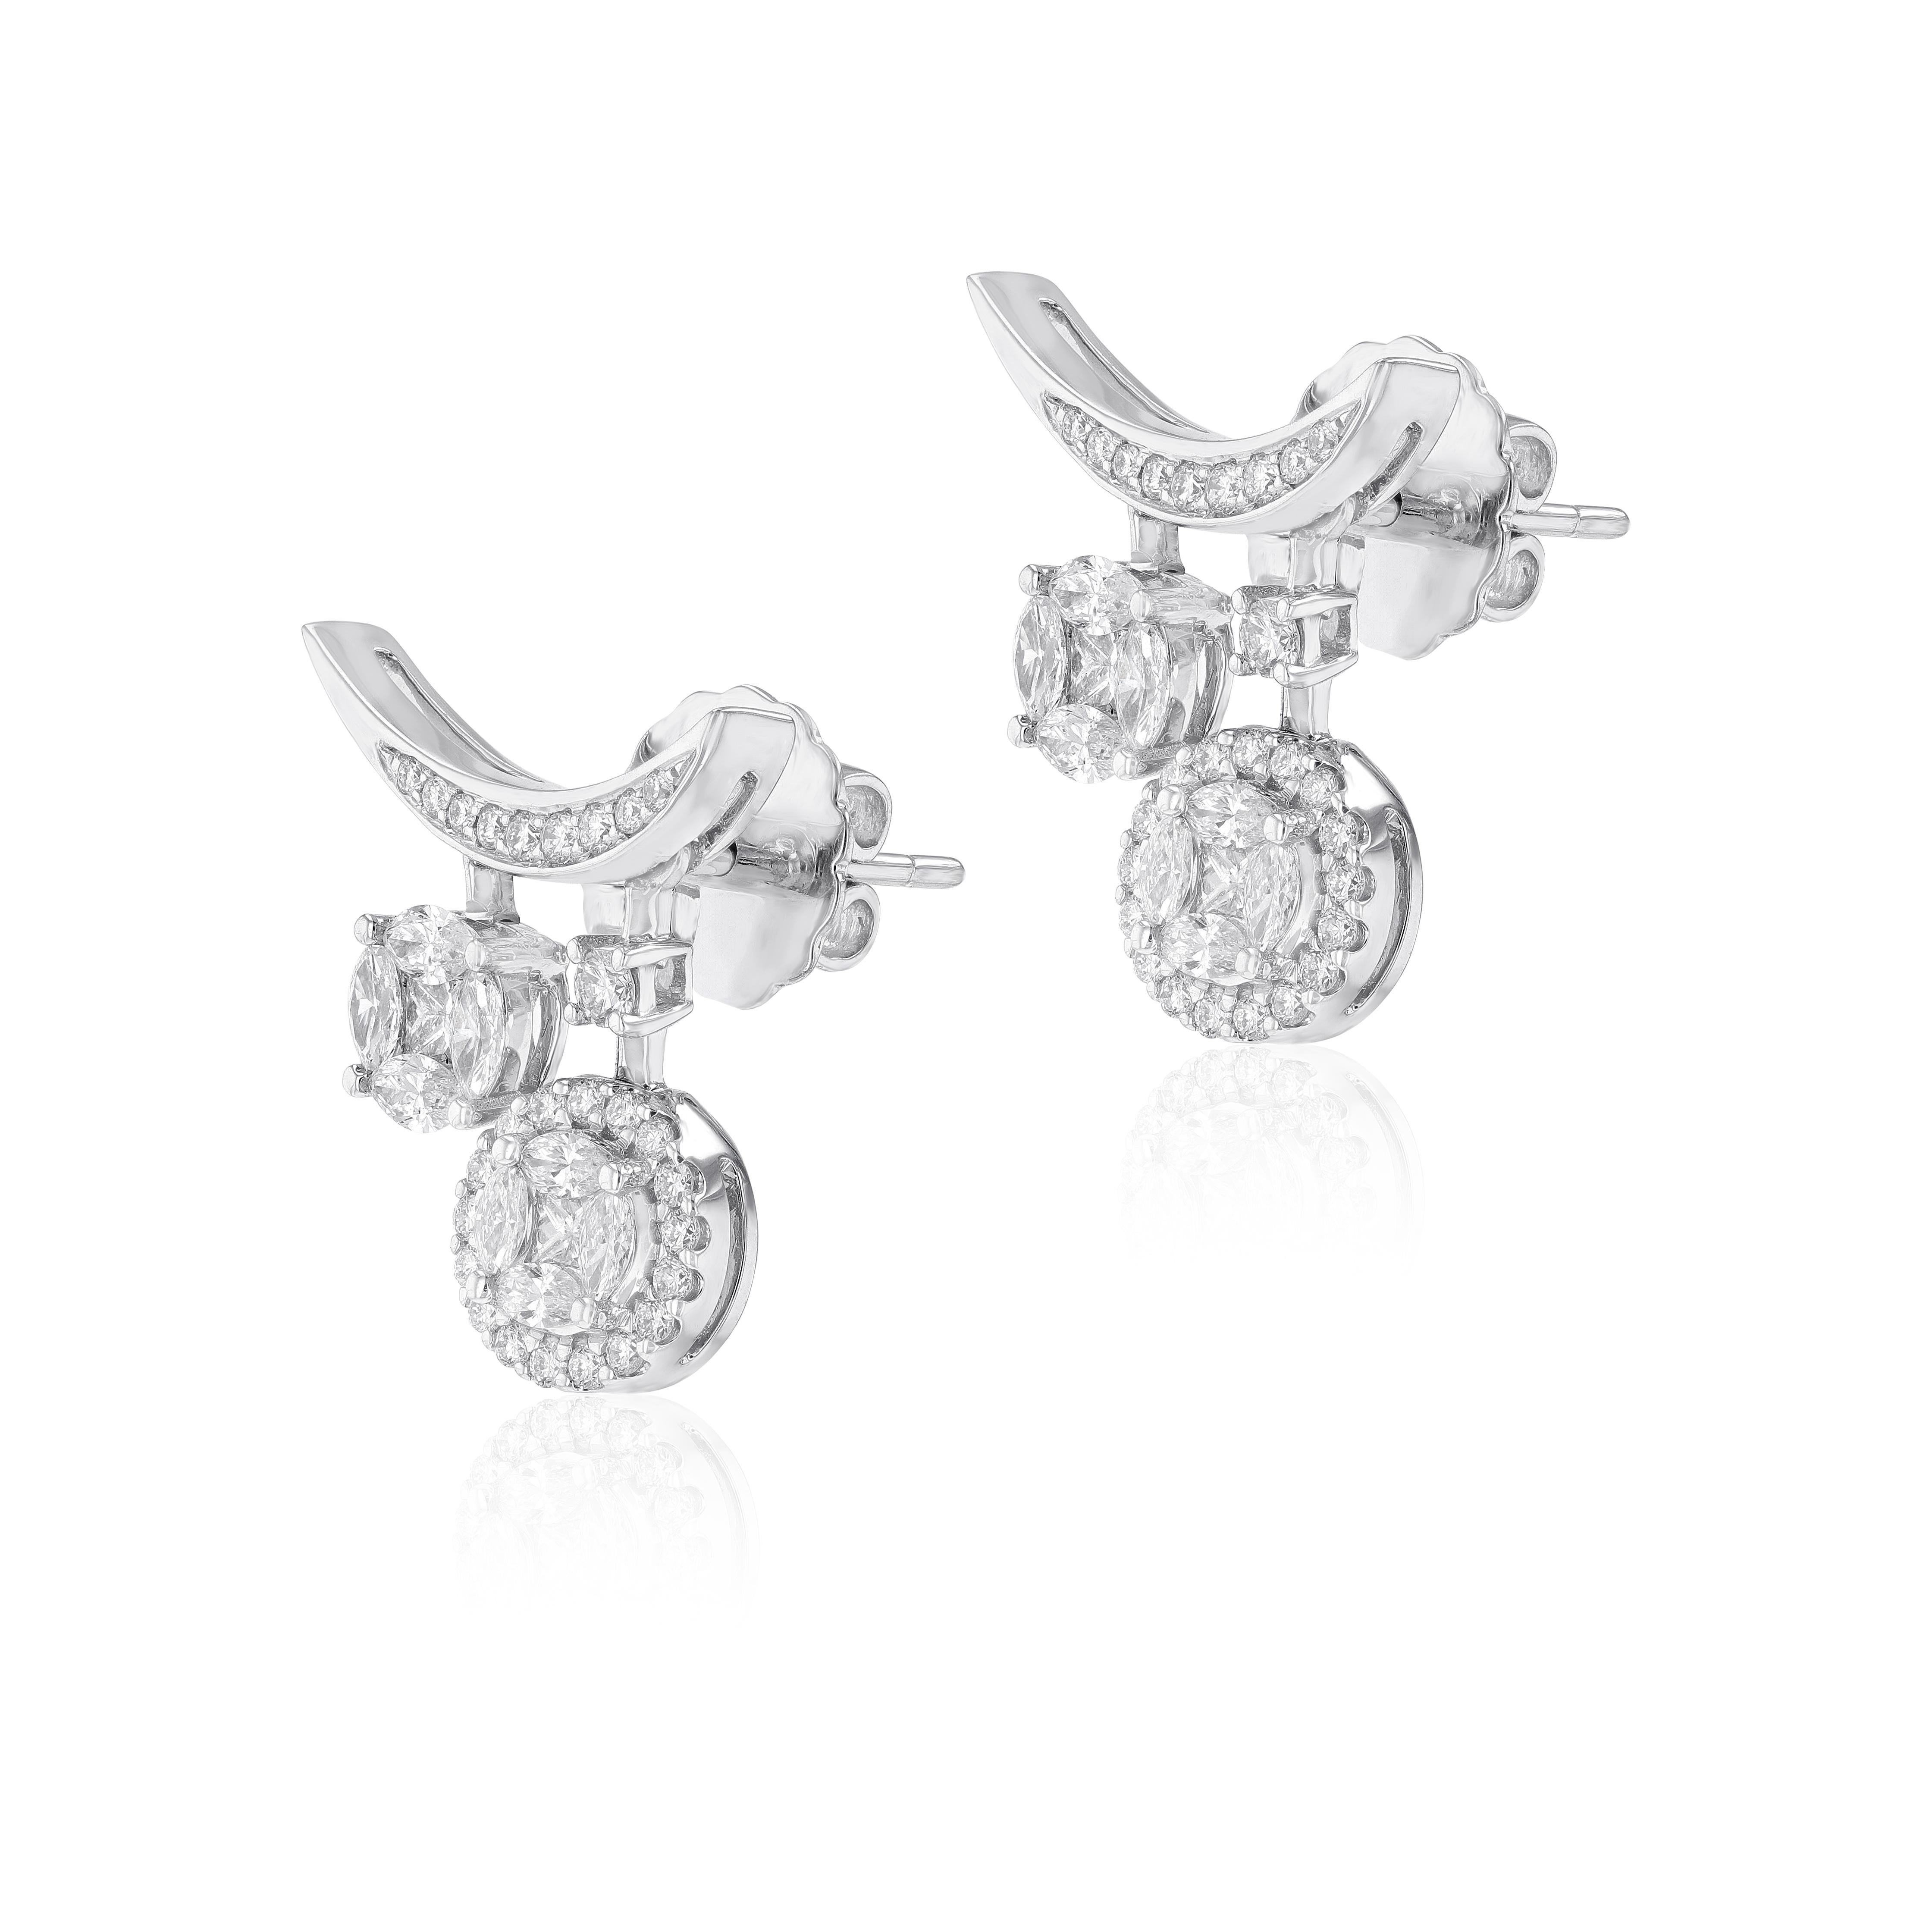 A petite yet powerful incarnation of crescent, the 18 karat white gold earring is illuminated by round cut diamonds that is given vibrant accents by their delicate wings. Suspended from each side 2 exquisite small to medium round shape diamonds that